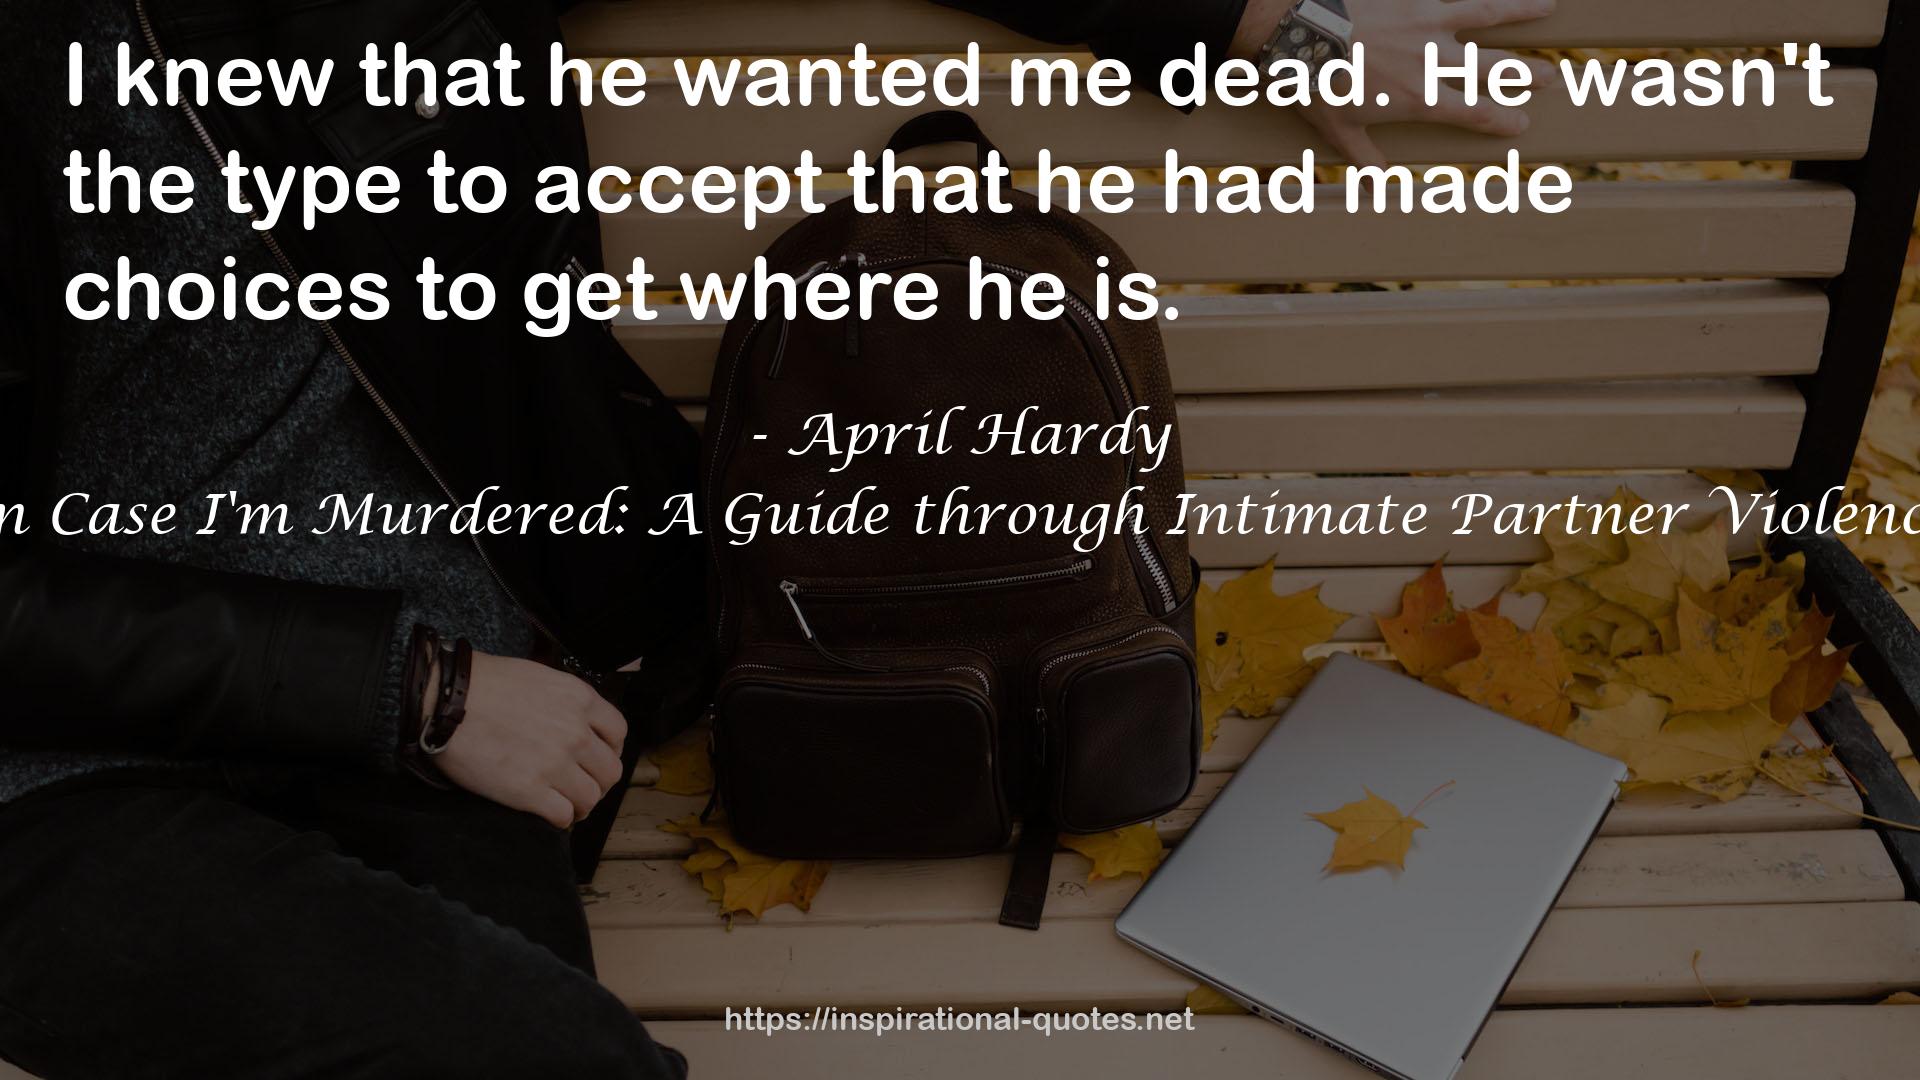 April Hardy QUOTES